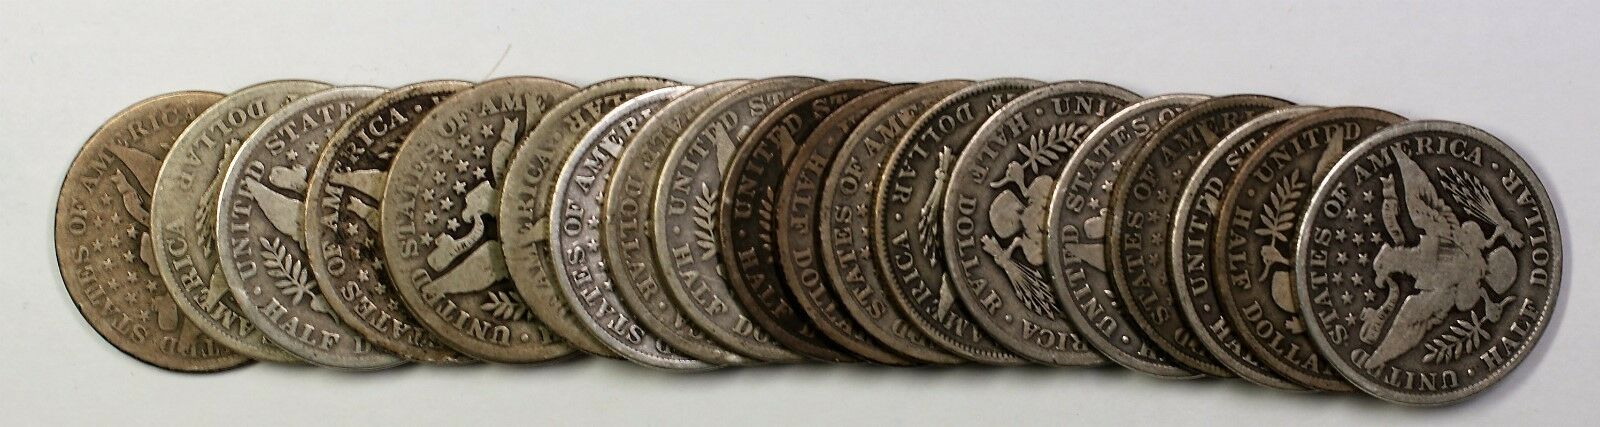 1906 Barber Half Dollar 50c Roll 20 Circulated 90% Old Silver Coins Lot